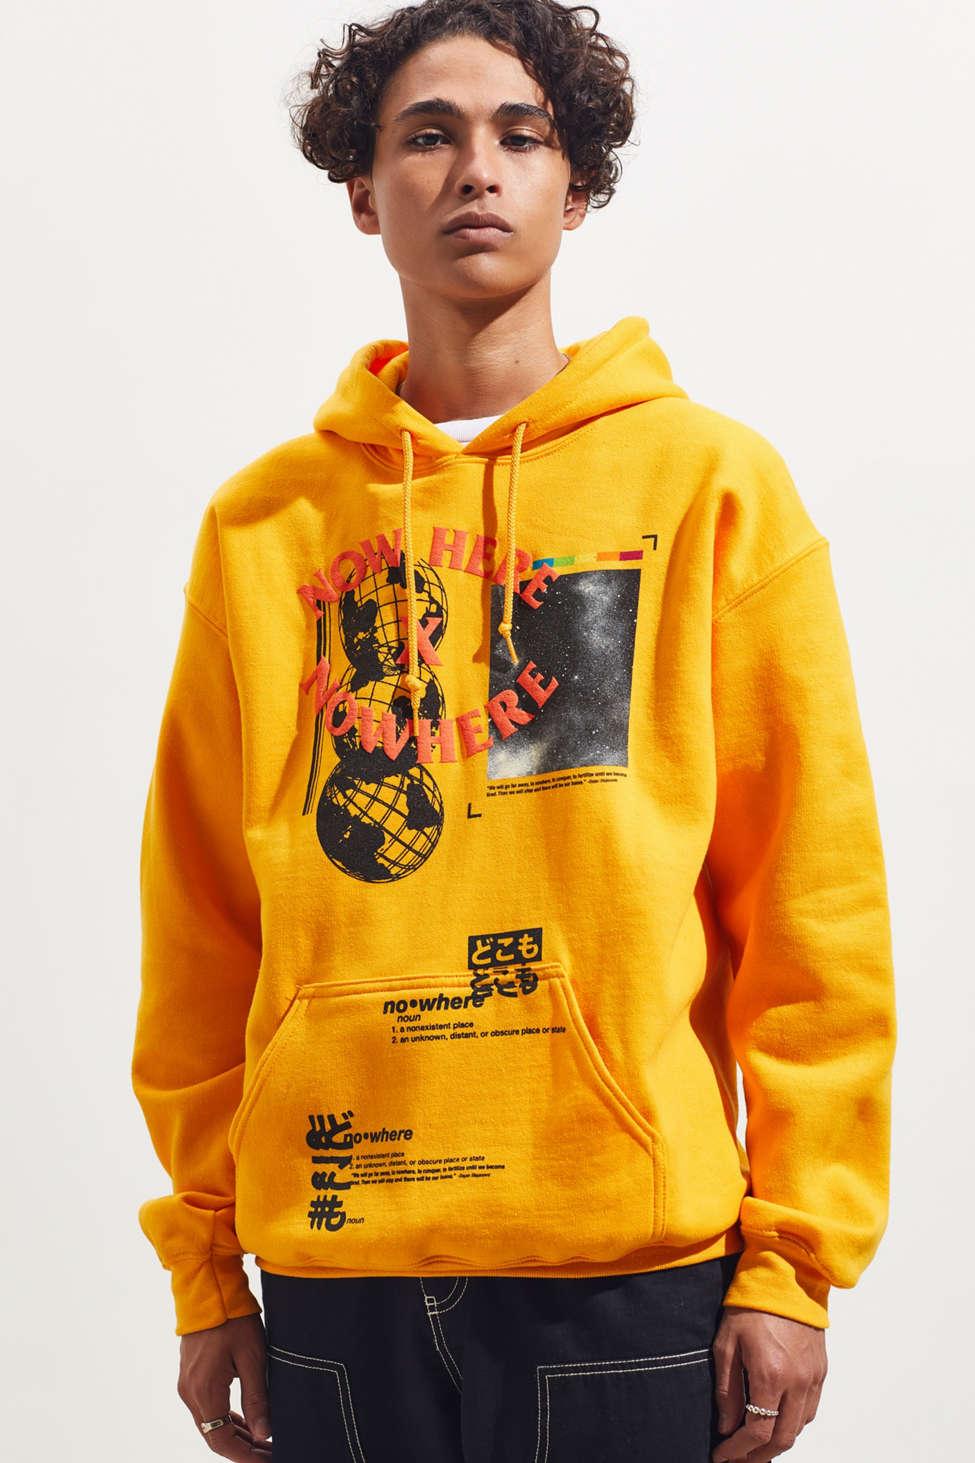 Urban Outfitters Nowhere Puff Print Graphic Hoodie Sweatshirt in